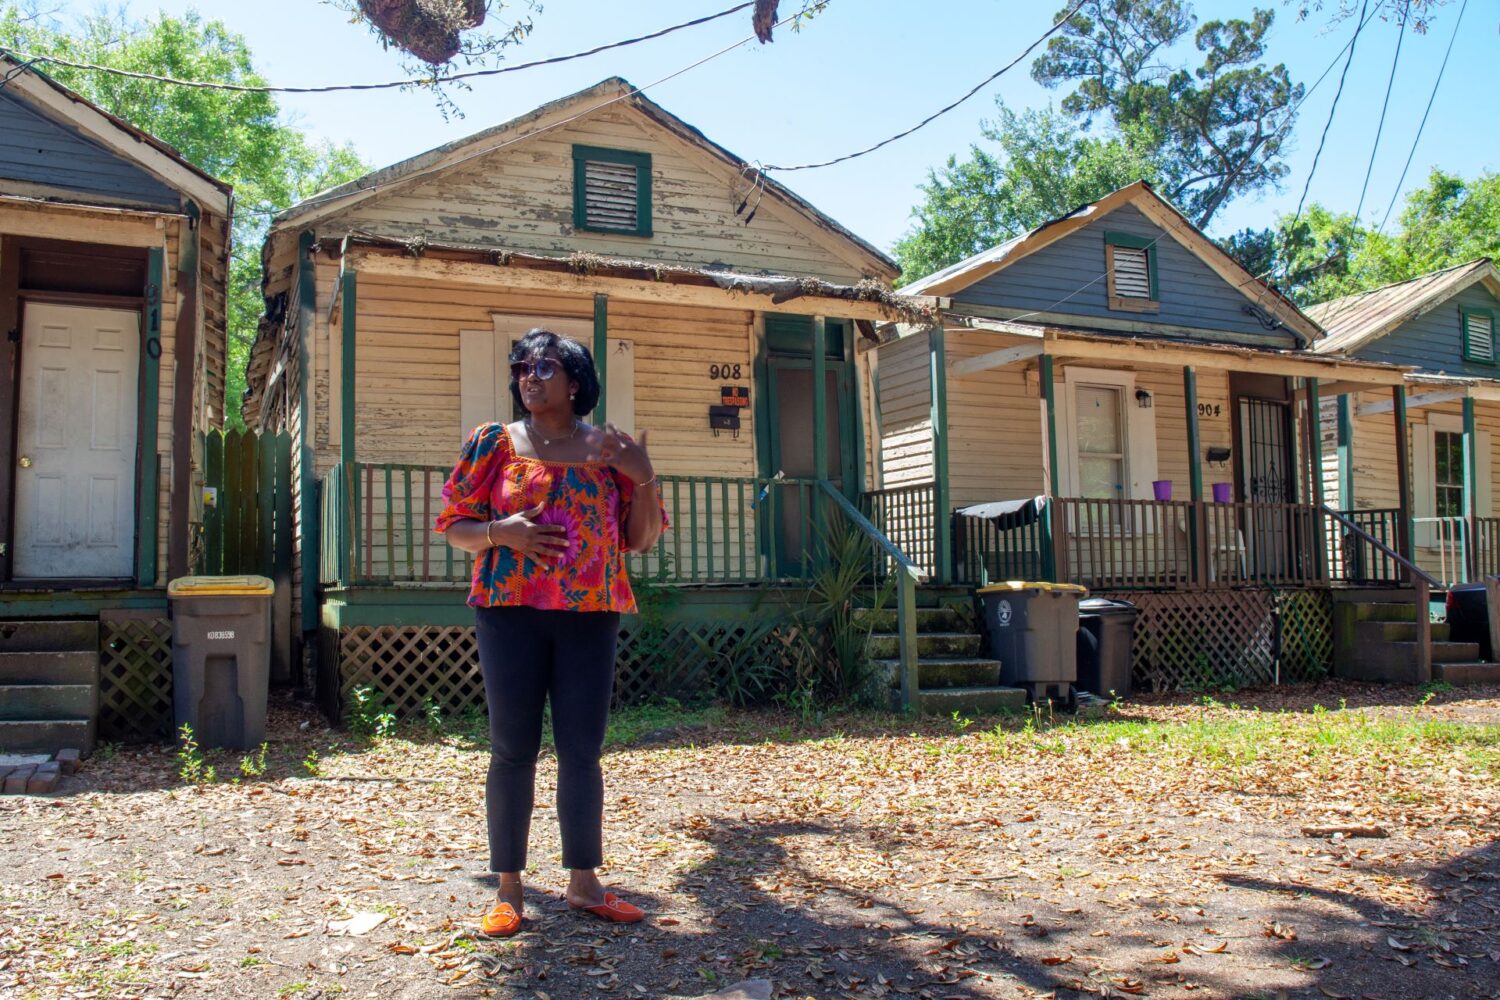 A person gives a tour in front of houses in the Eastside of Jacksonville.